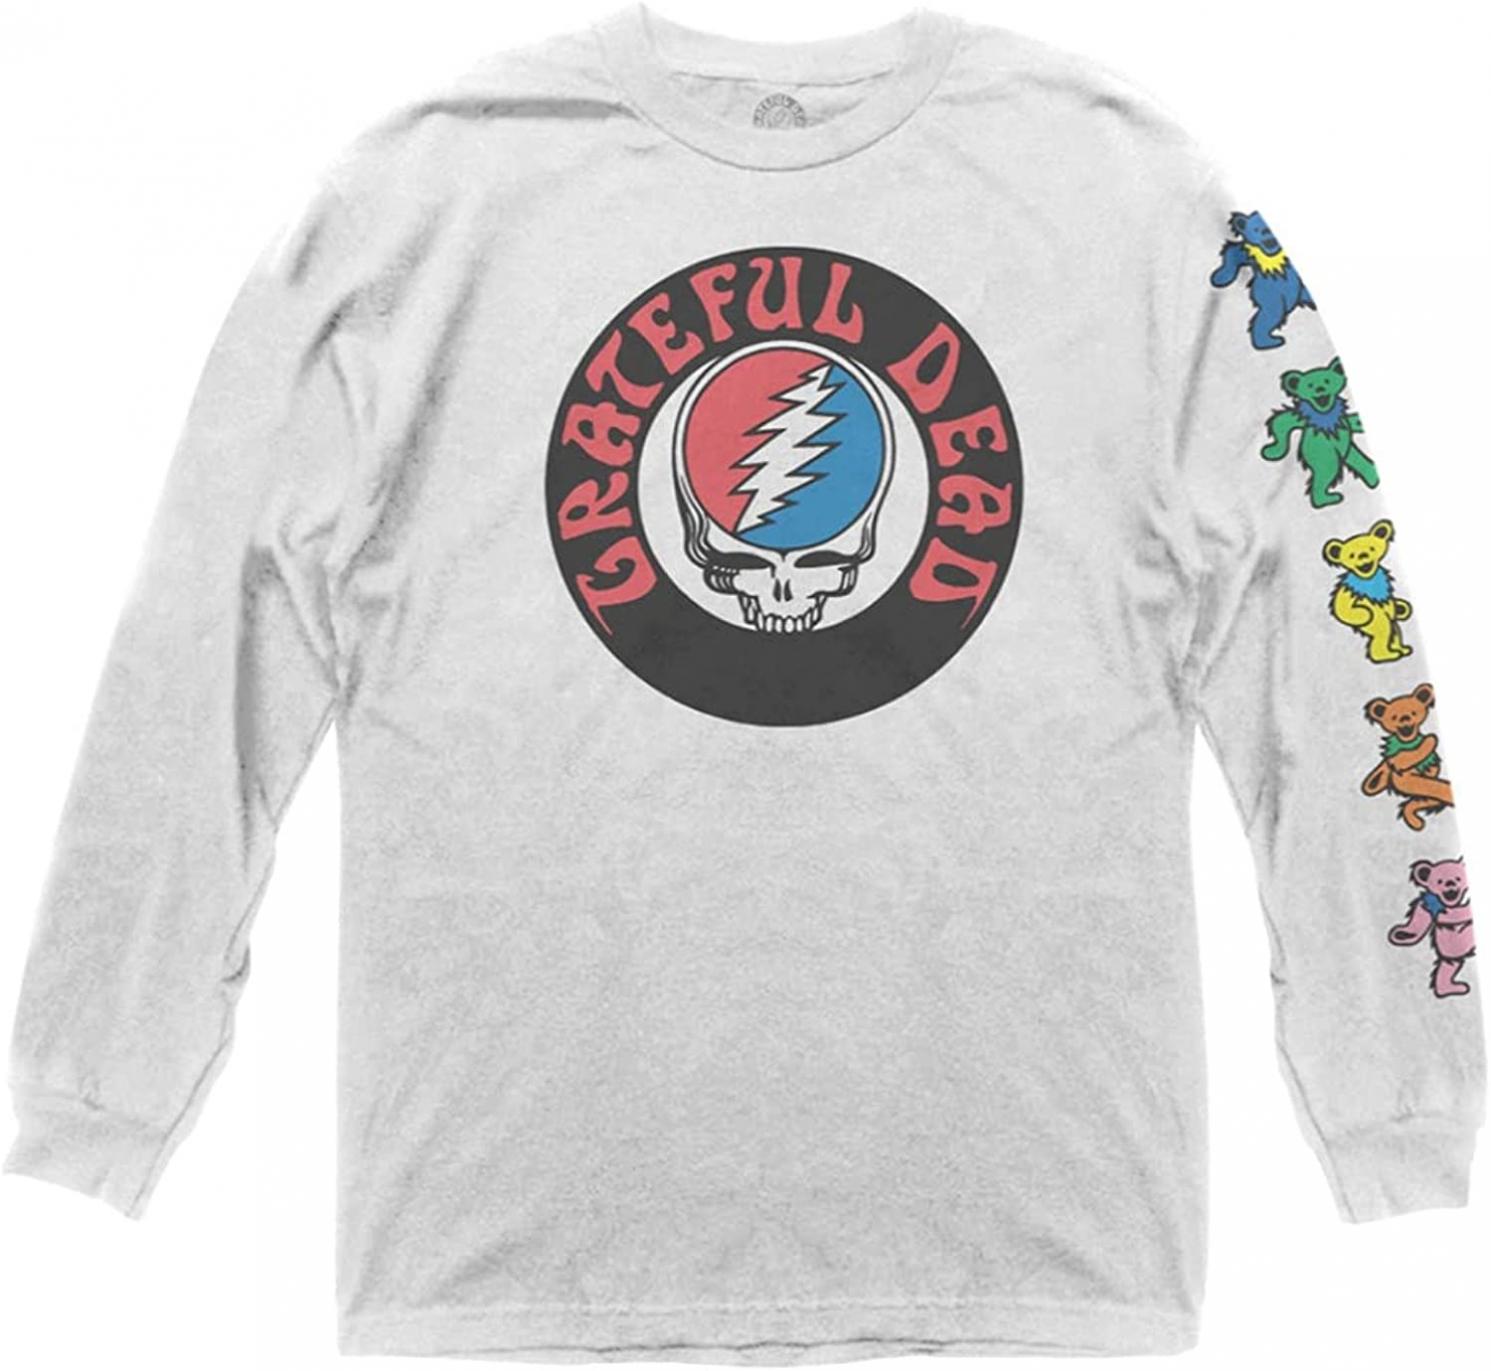 Ripple Junction Grateful Dead Steal Your Face Logo with Dancing Bears Long-Sleeve Adult Crew T-Shirt Officially Licensed